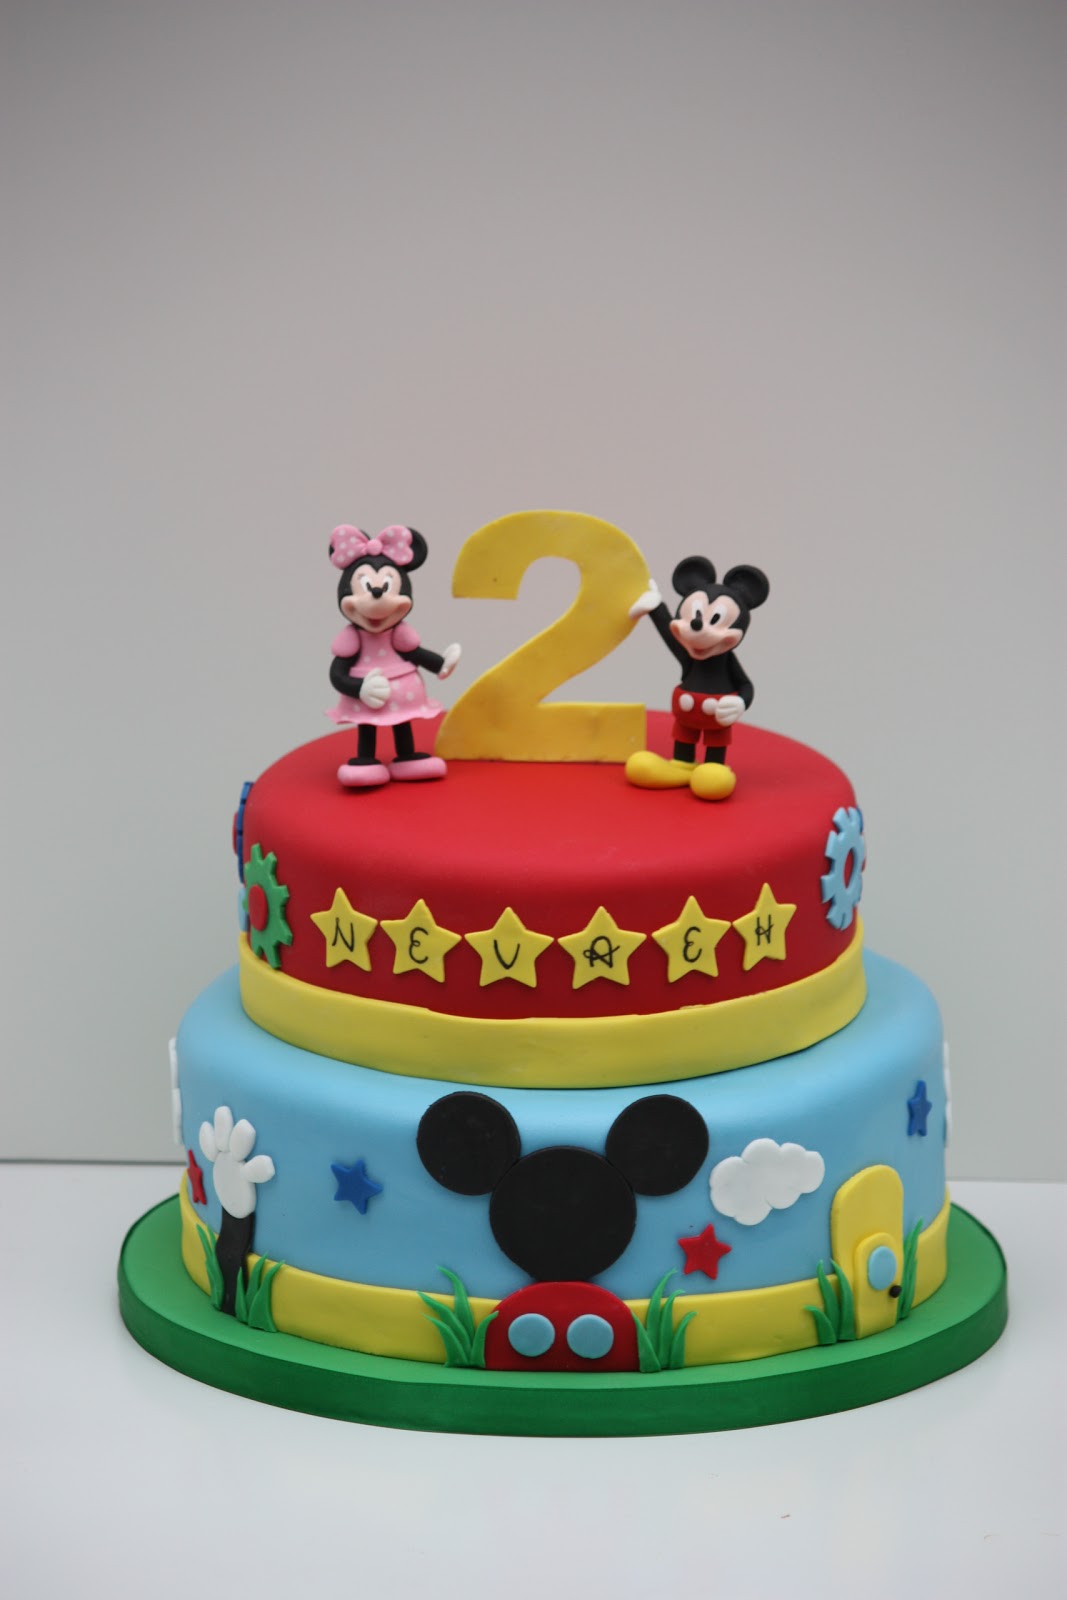 Whimsical by Design: Mickey Mouse Clubhouse Cake